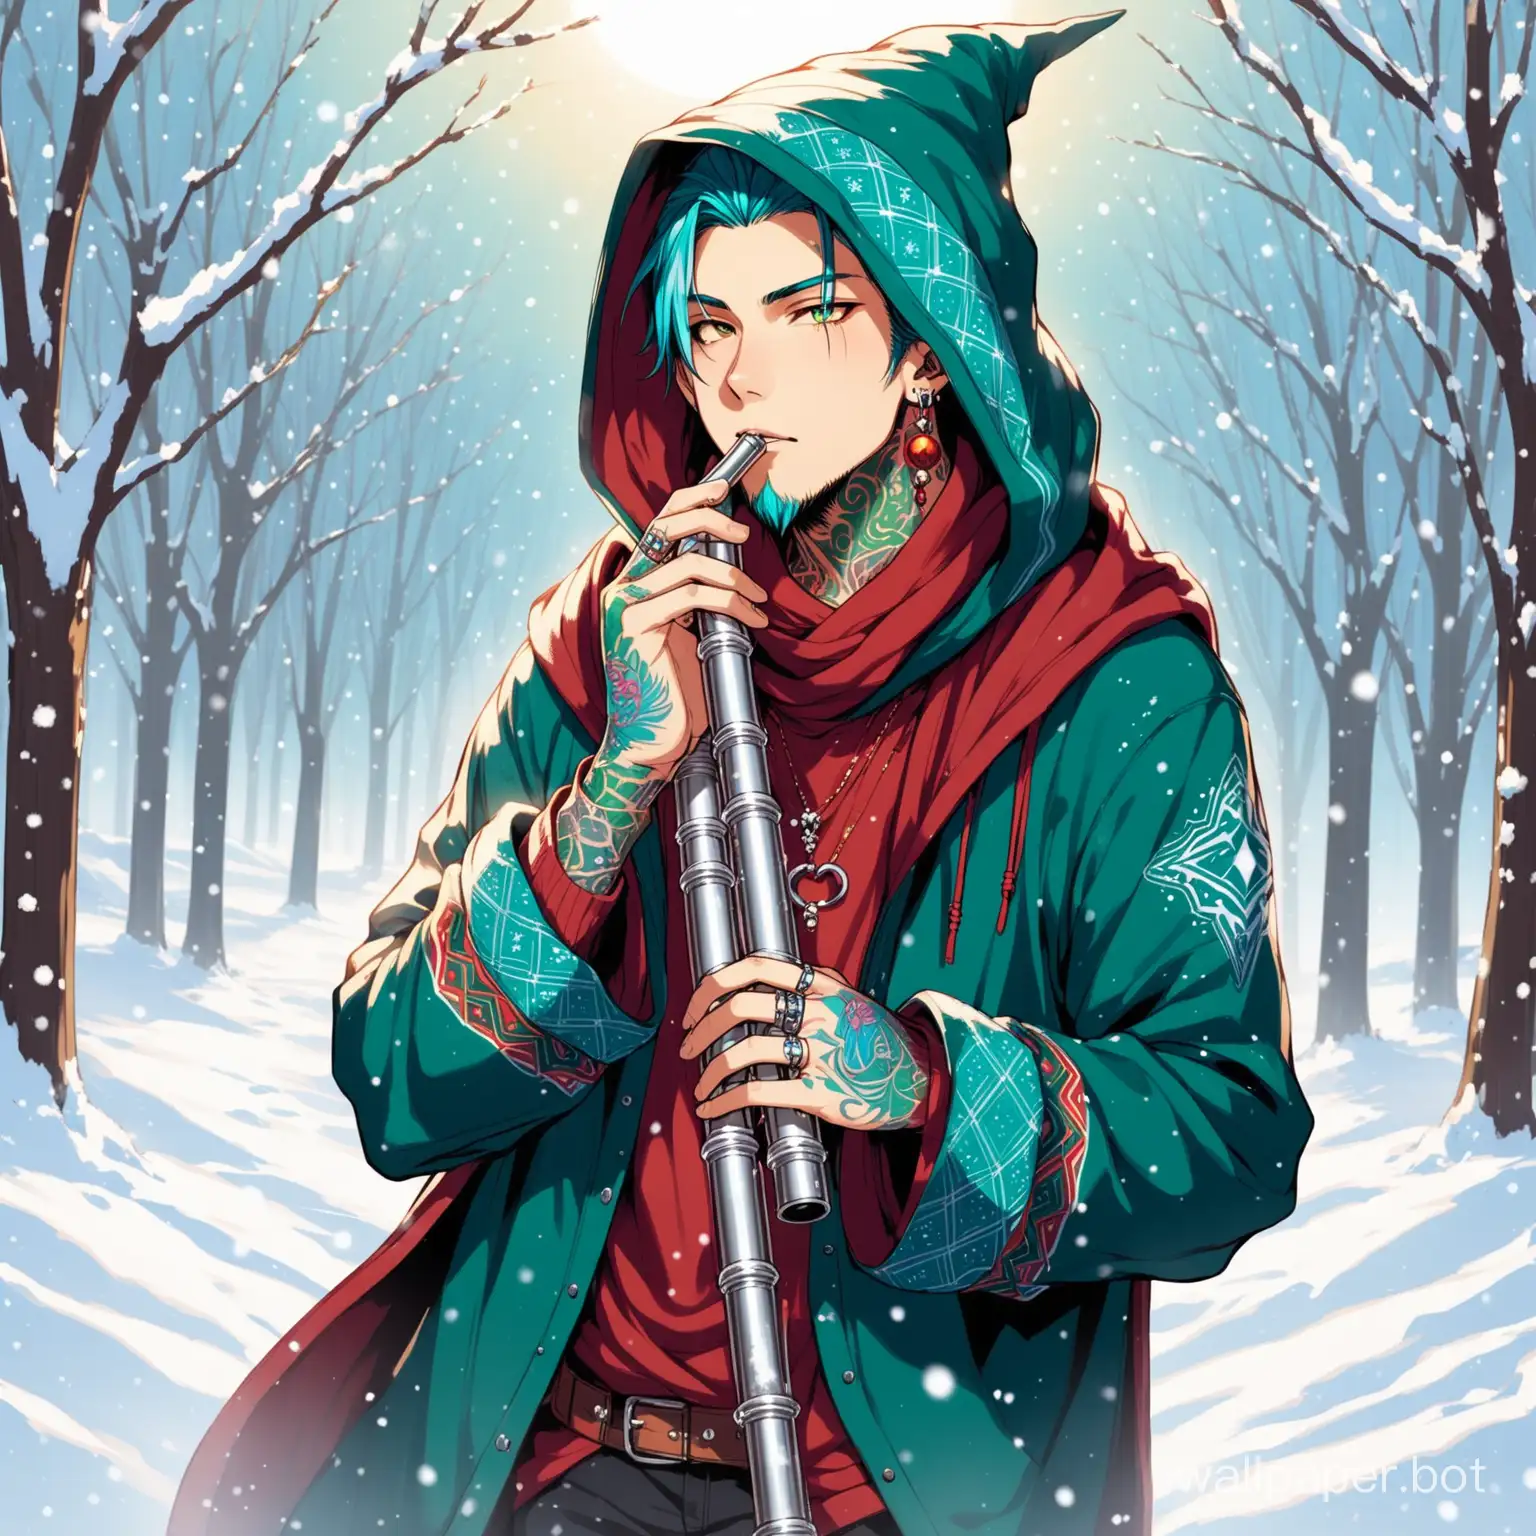 a wizard sing his  steel flute and have many tatto in his face and colurfol outfit  and unique earings and rings in his handsand the background is in the snow and cold eyes make it young and handsome and also the outfit hoodie jacket can u make it far